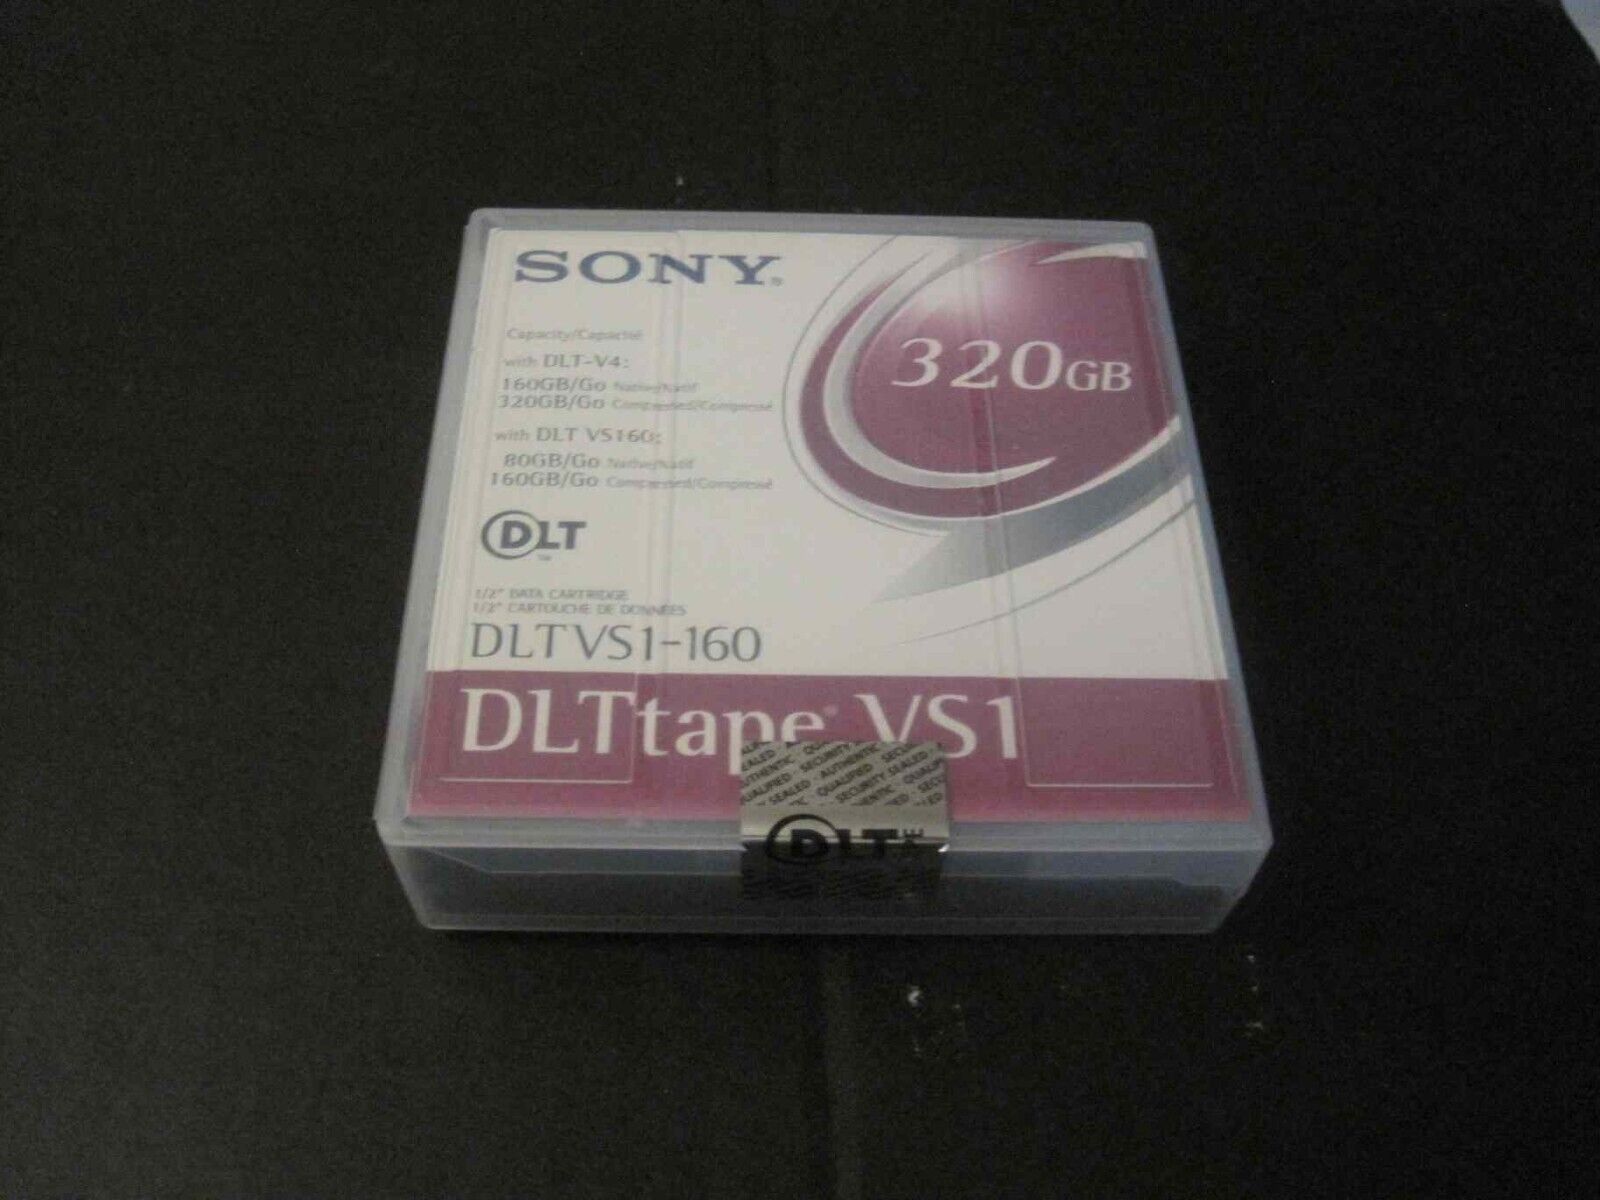 Sony DLT tape VS1 320 GB - New and sealed